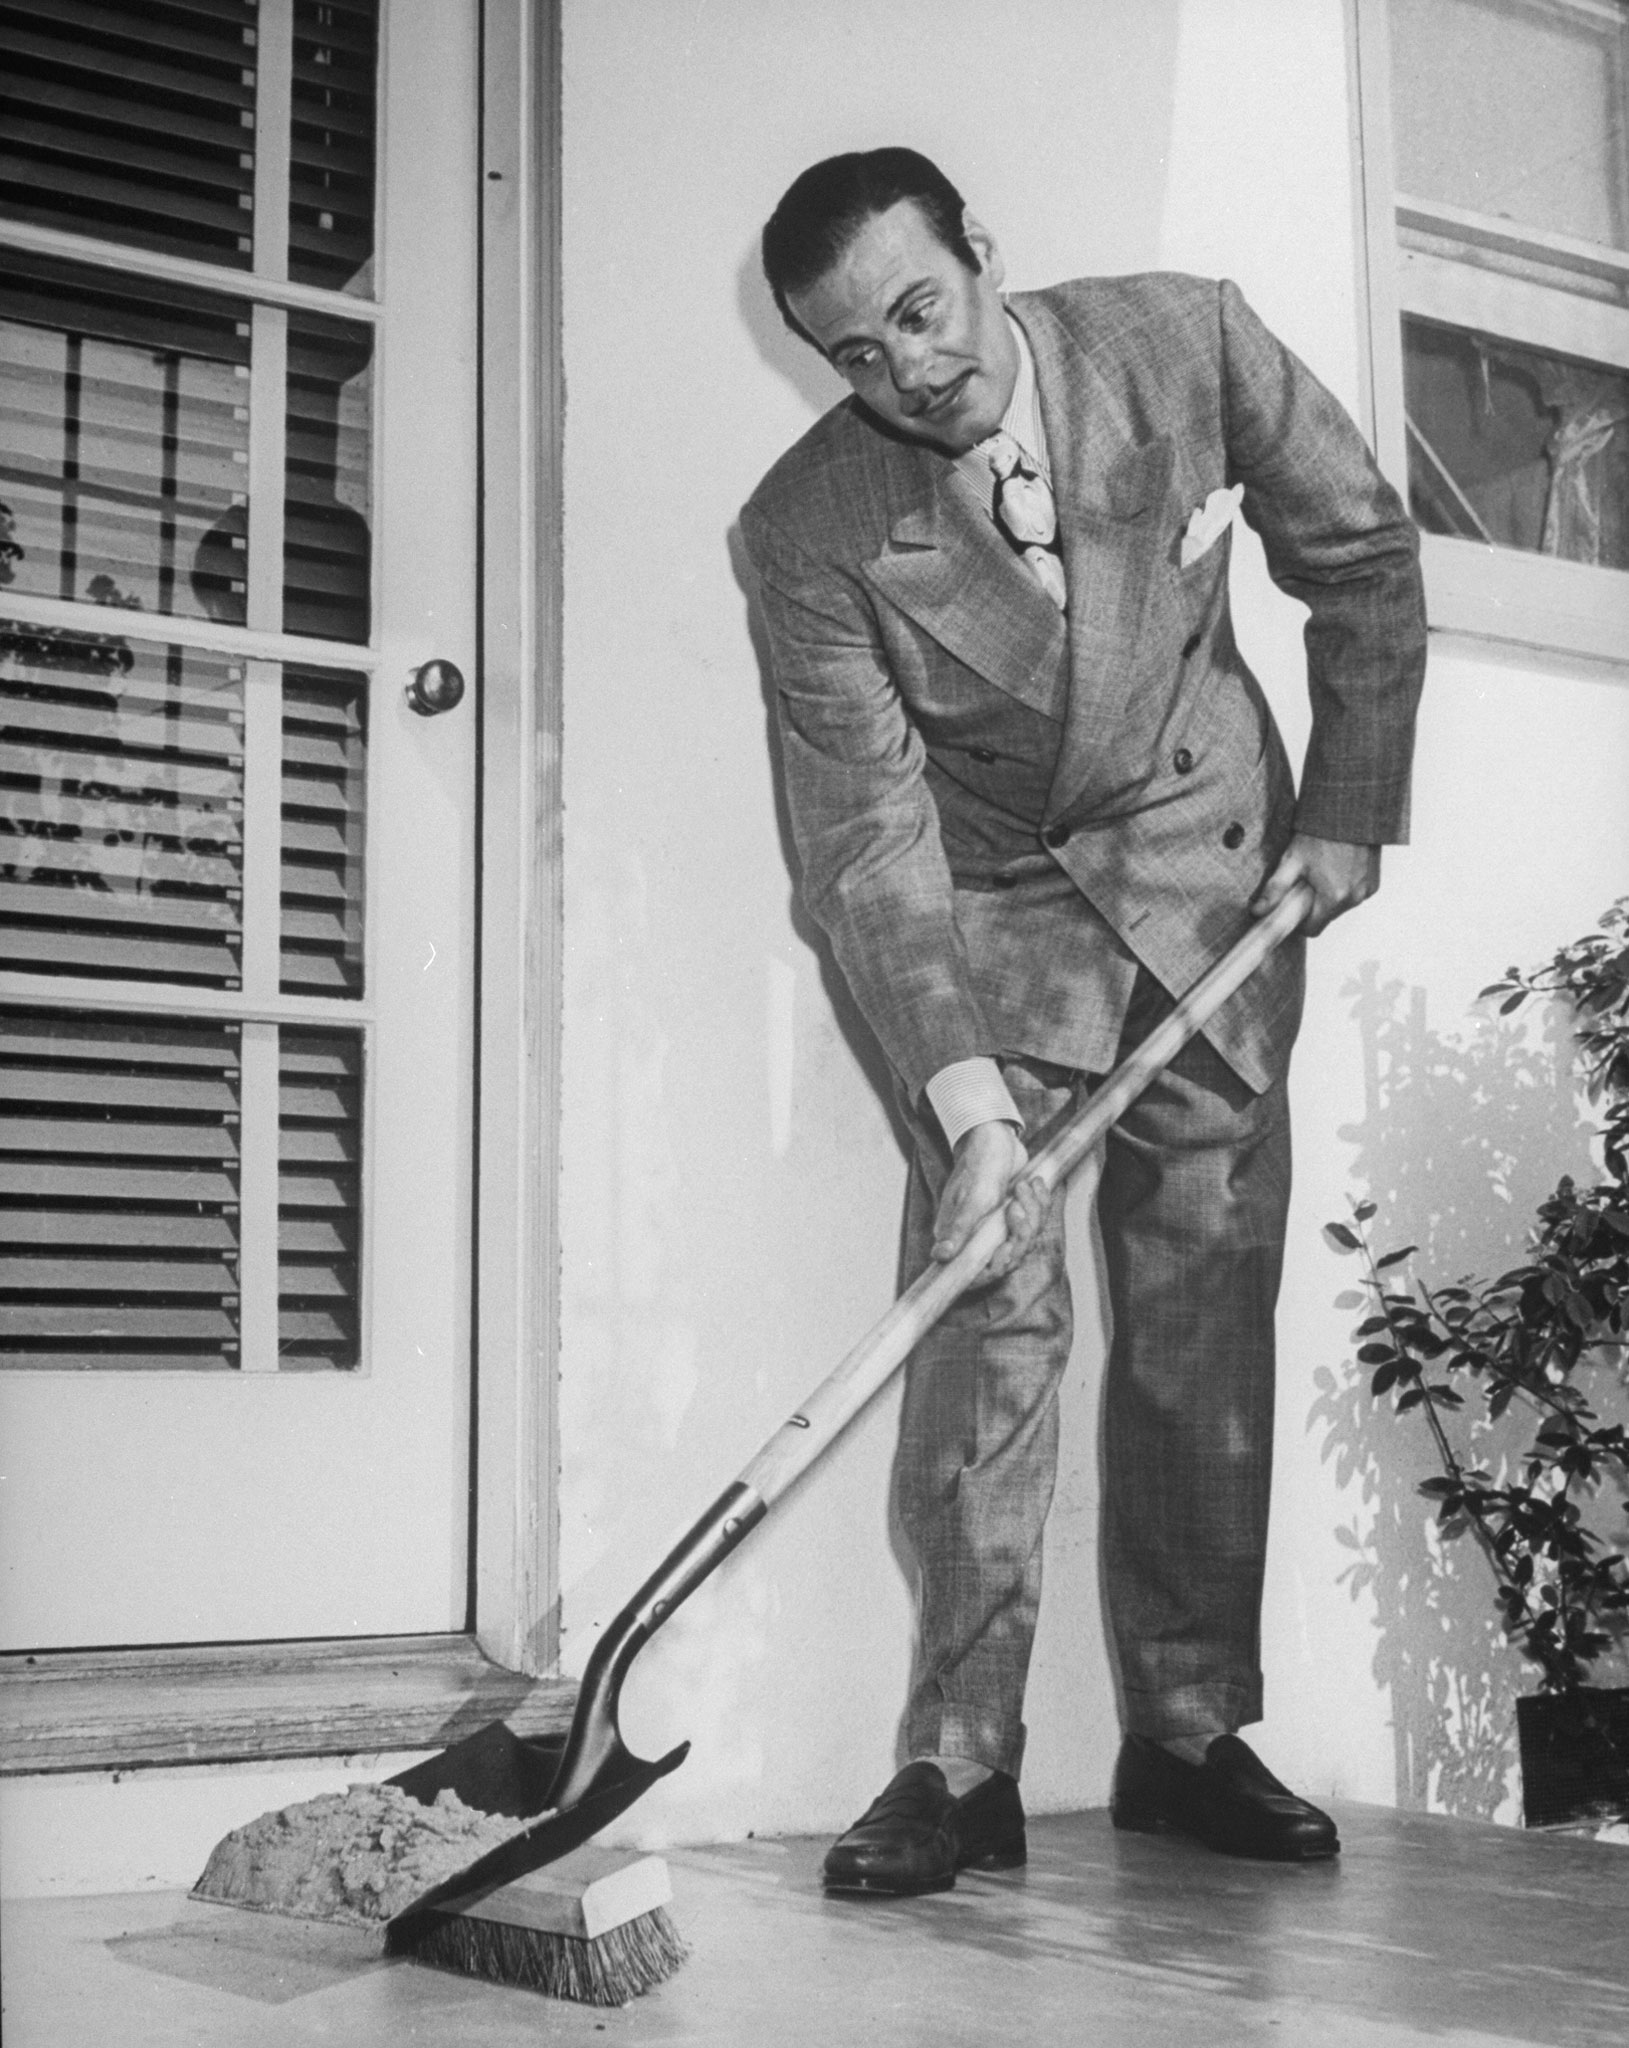 Shovel-brush, used by Comedian Billy de Wolfe, is artfully designed to sweep and scoop in one simple motion.